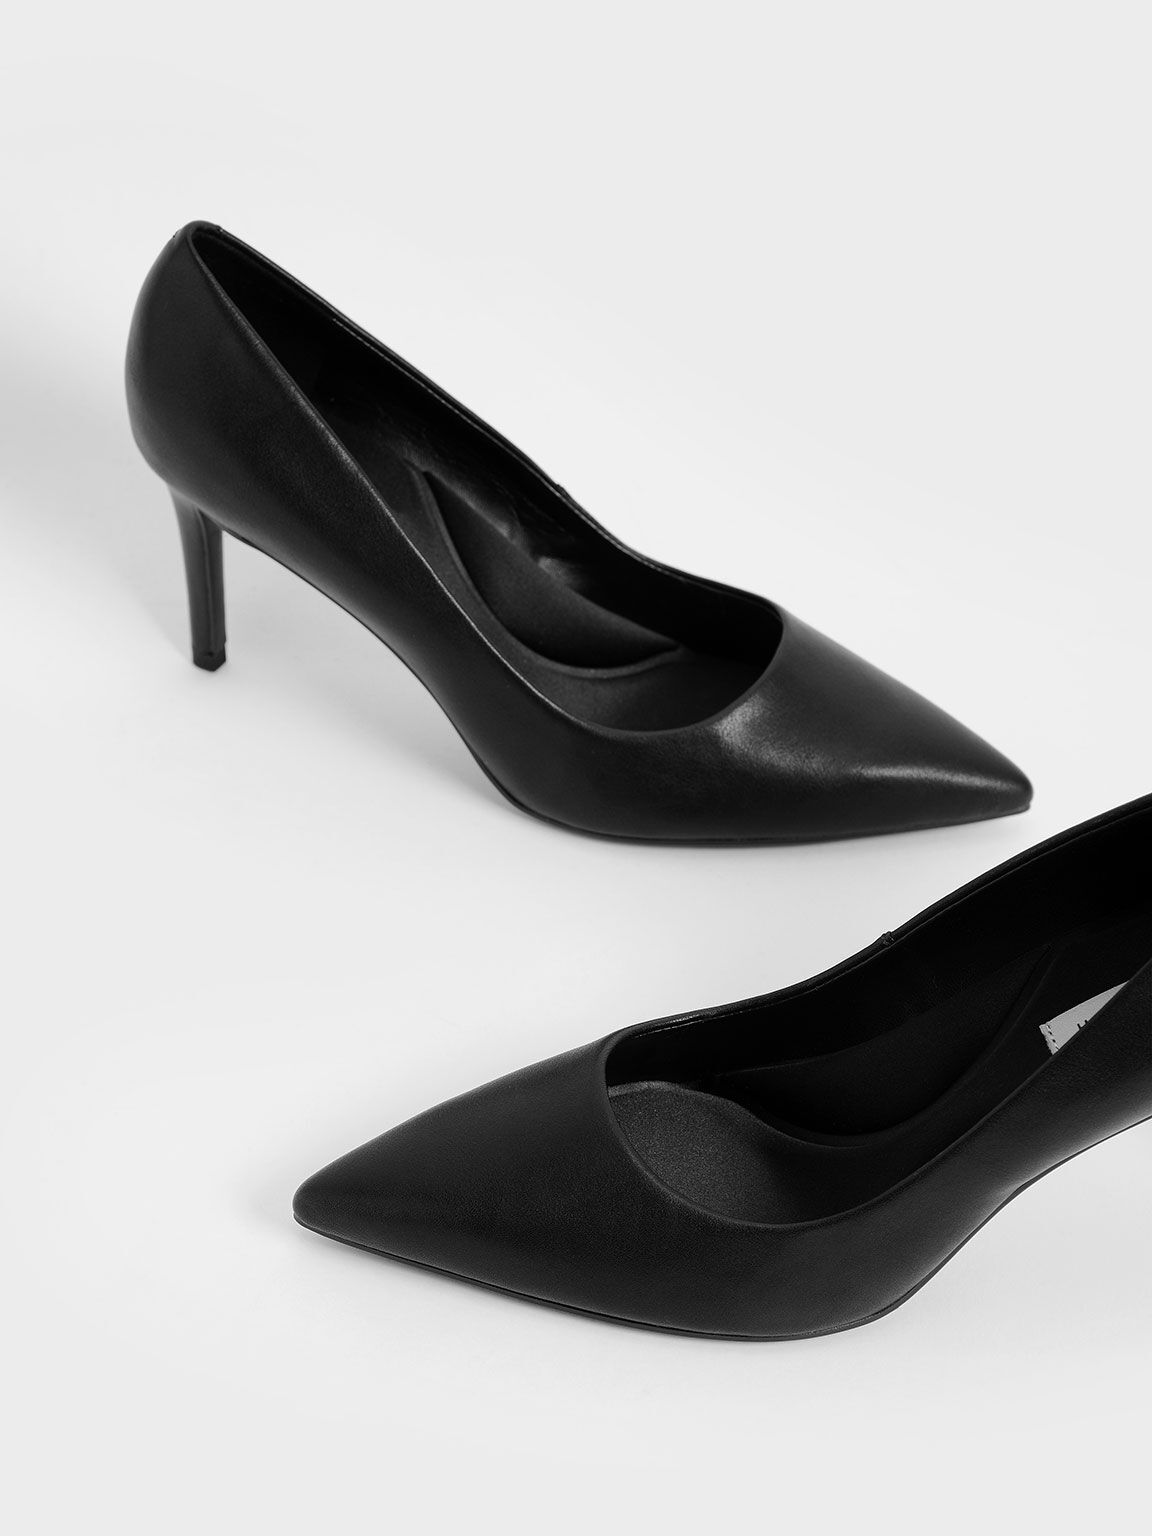 Zara chain black pointed toe heels. - Select and You